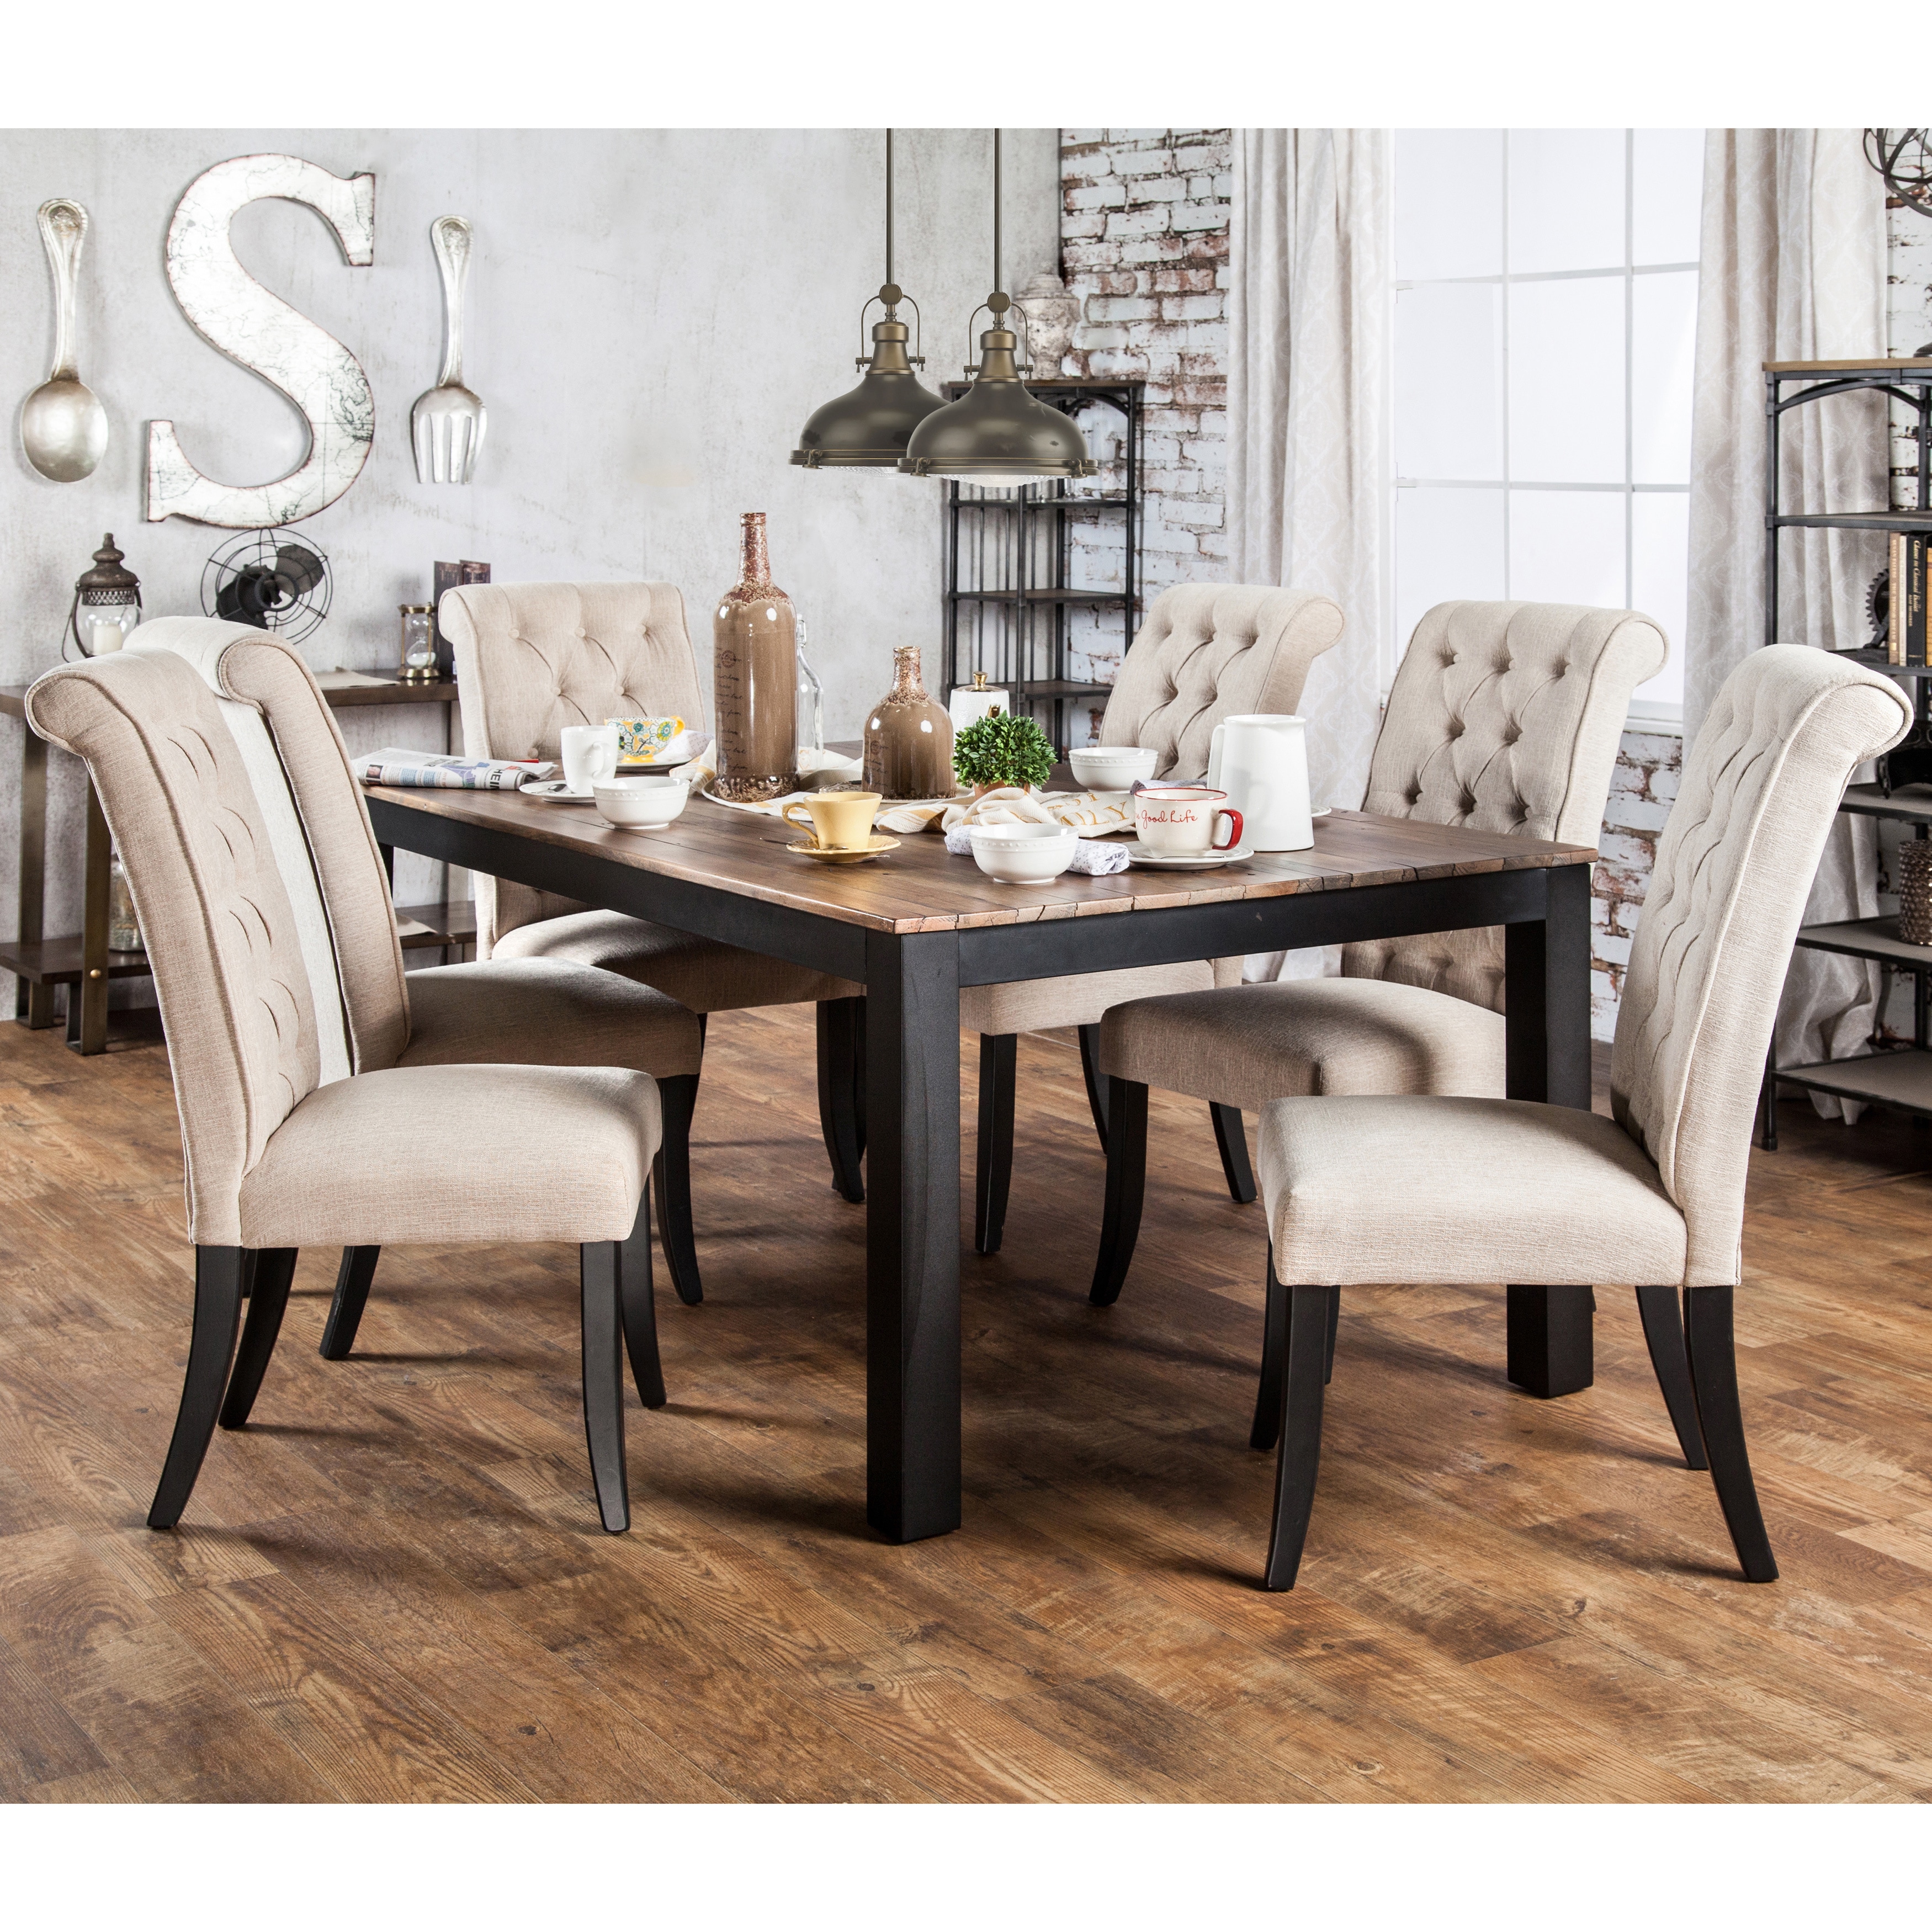 Furniture Of America Sheila Rustic Two Tone Dining Table Free